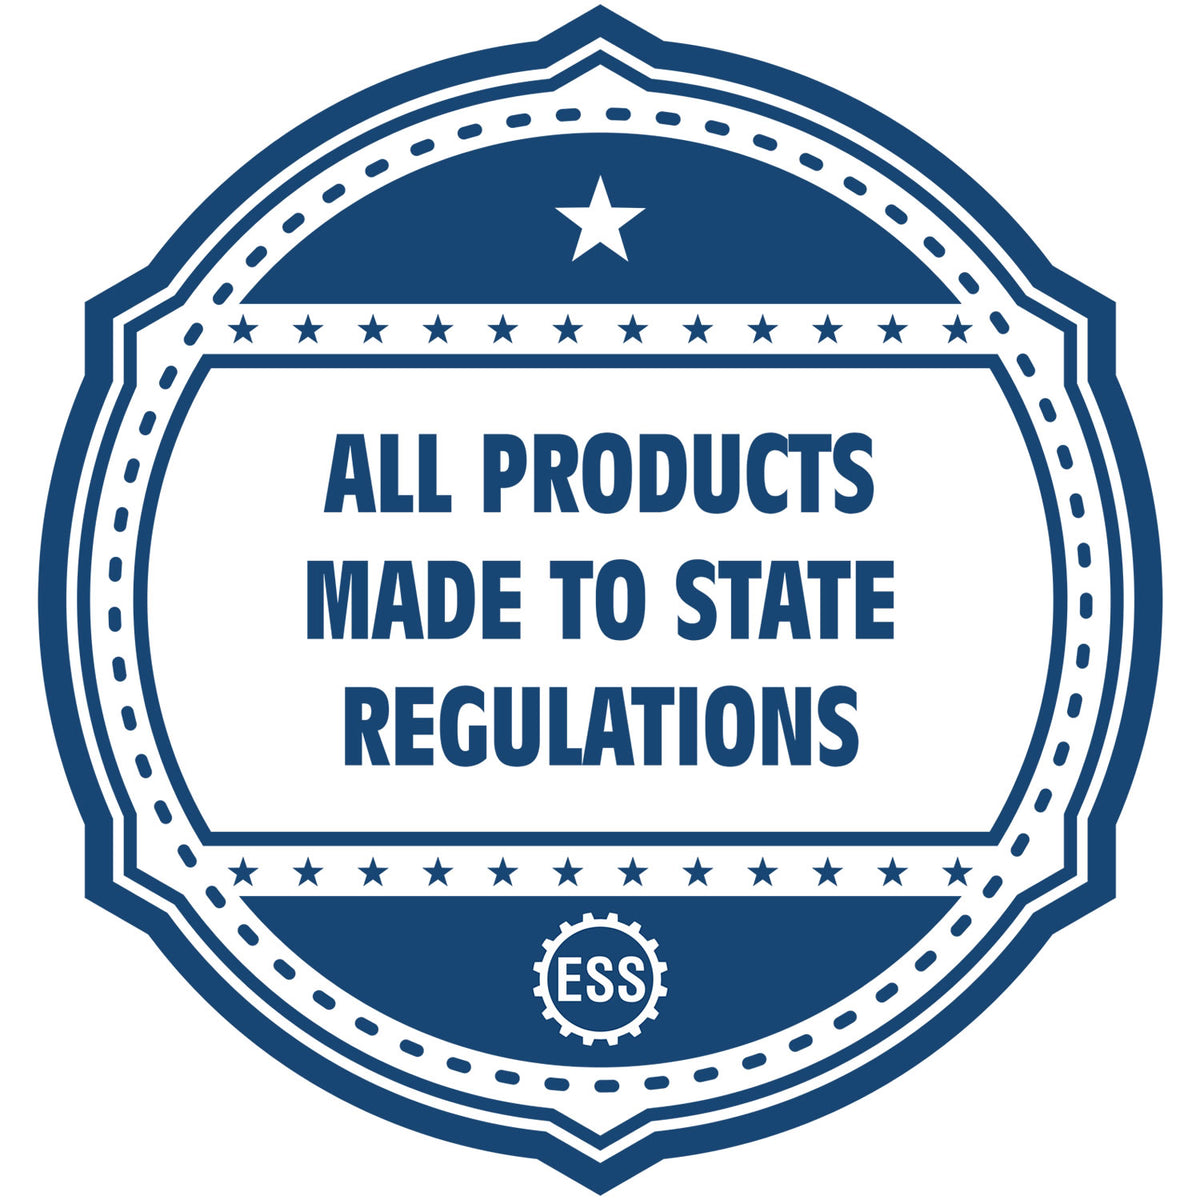 An icon or badge element for the State of Alabama Architectural Seal Embosser showing that this product is made in compliance with state regulations.